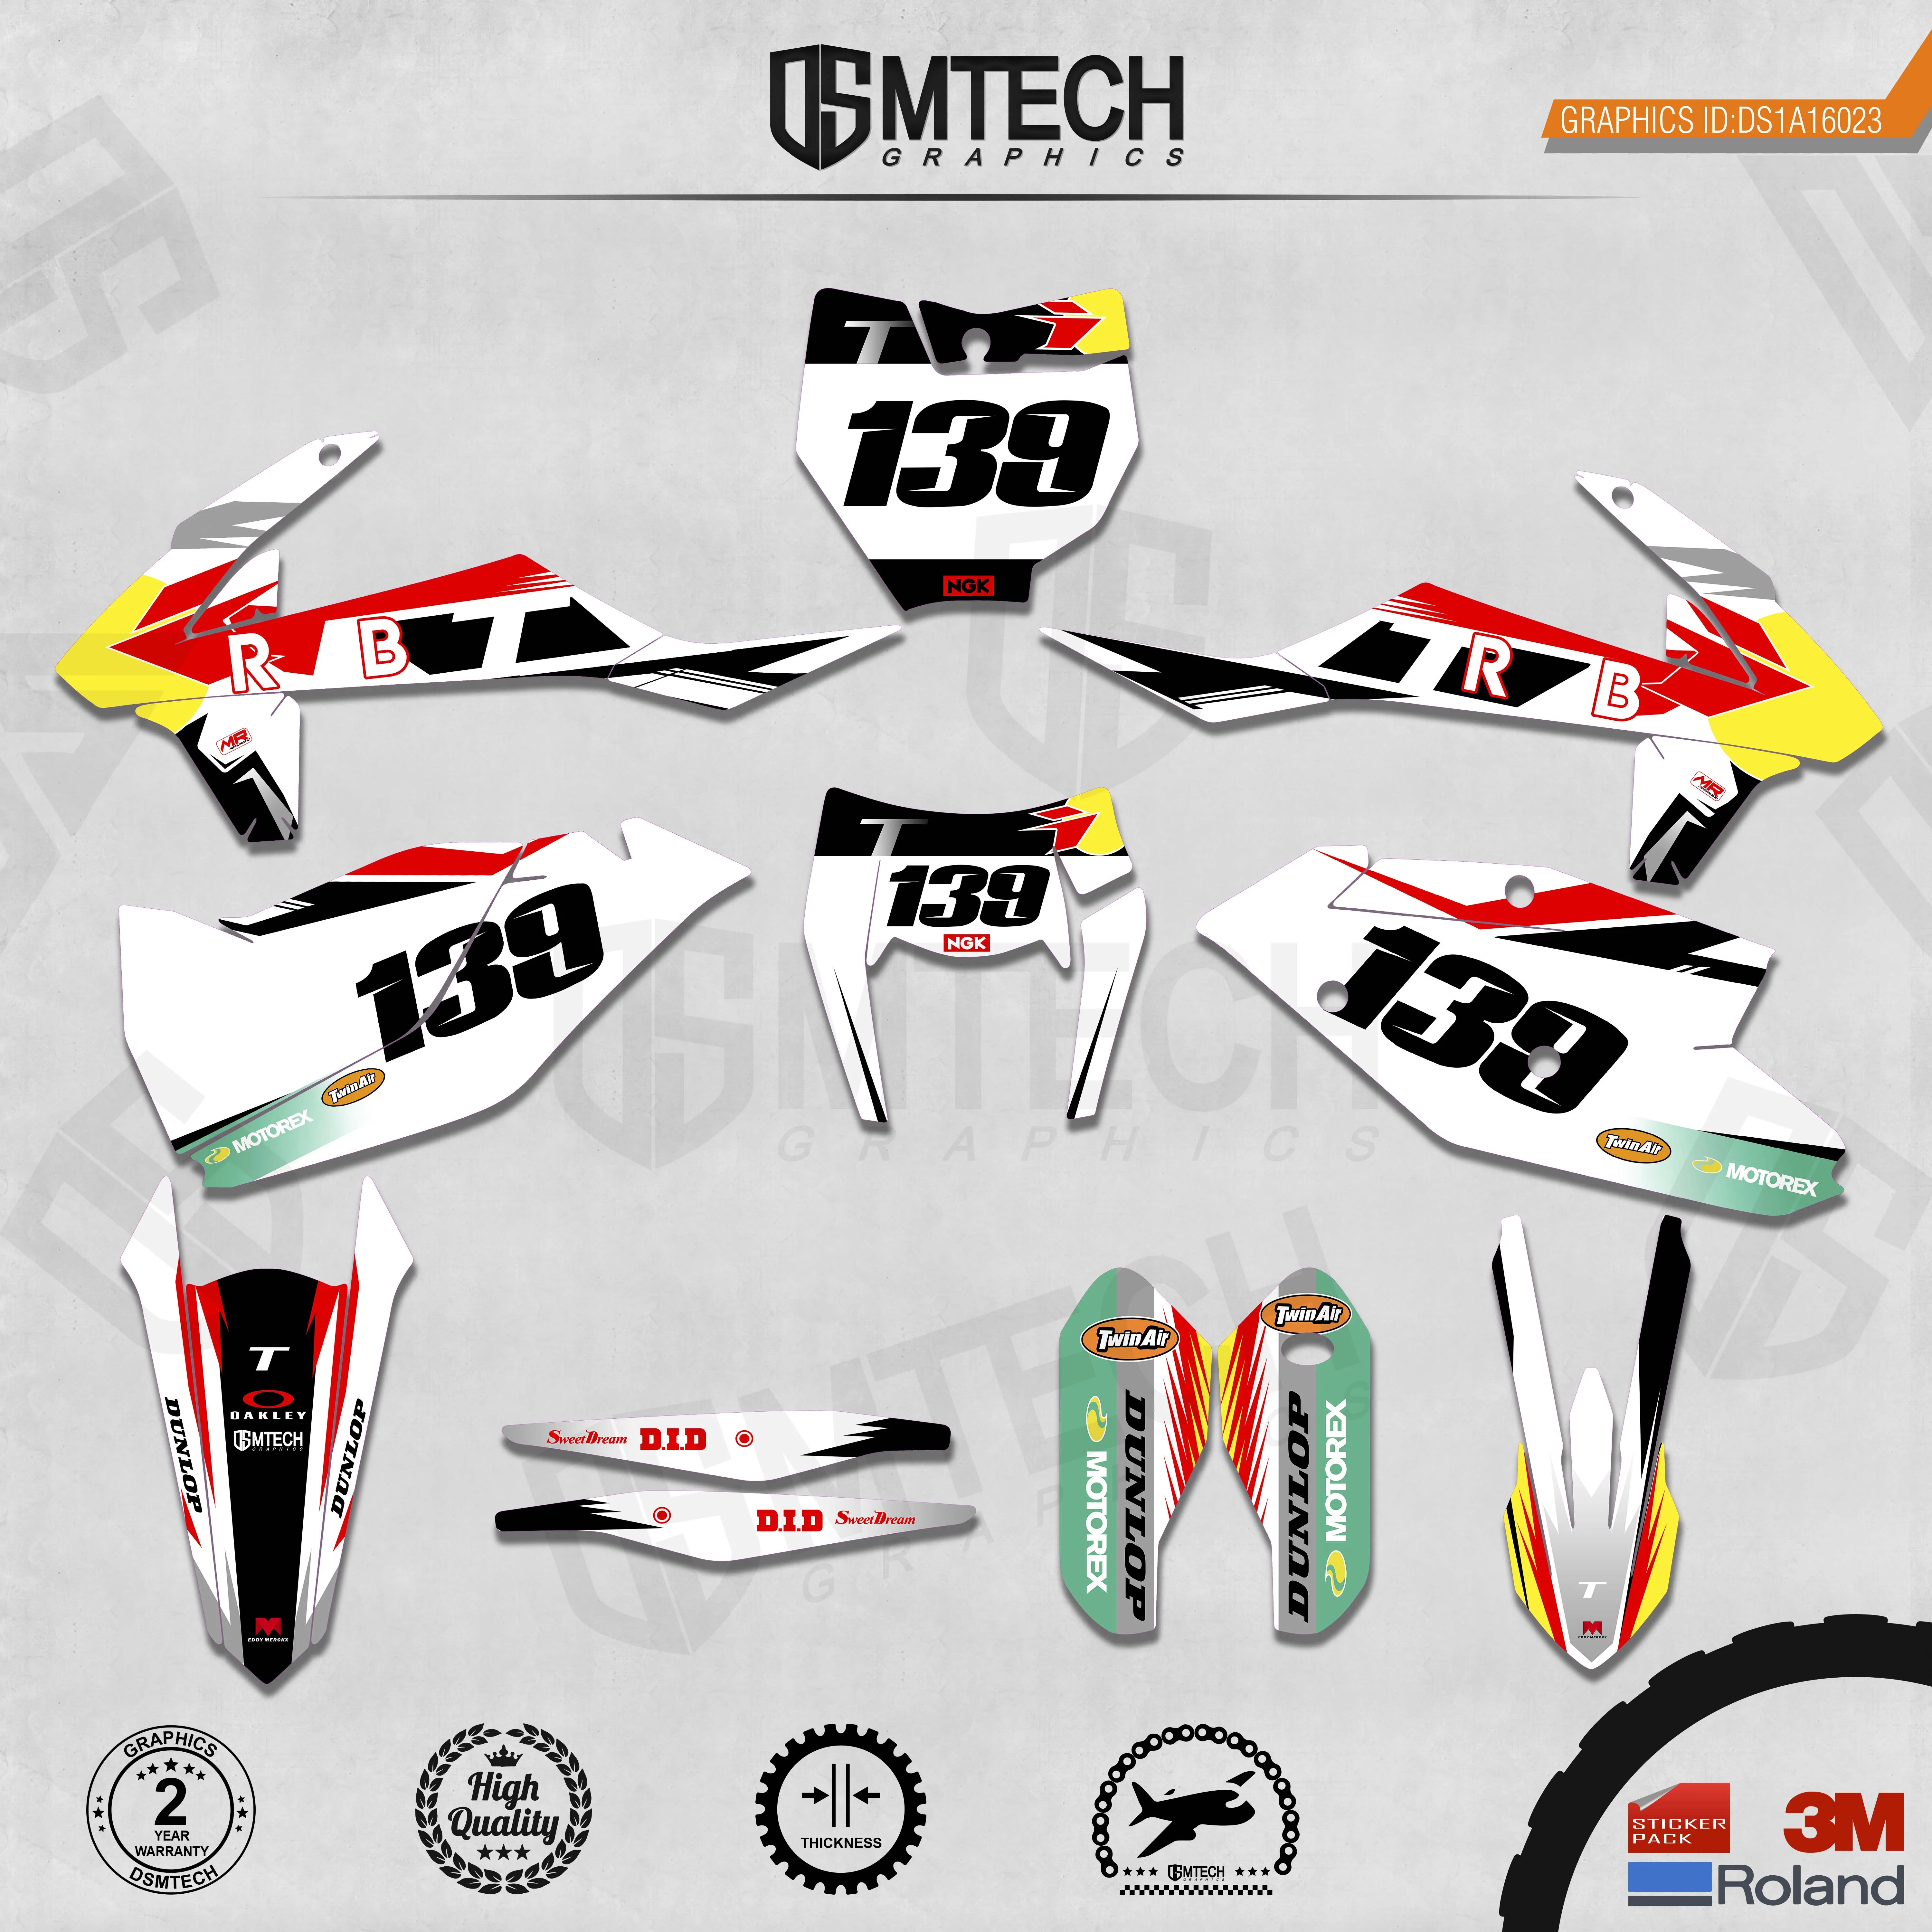 DSMTECH Customized Team Graphics Backgrounds Decals 3M Custom Stickers For KTM 2017-2019 EXC 2016-2018 SXF  023